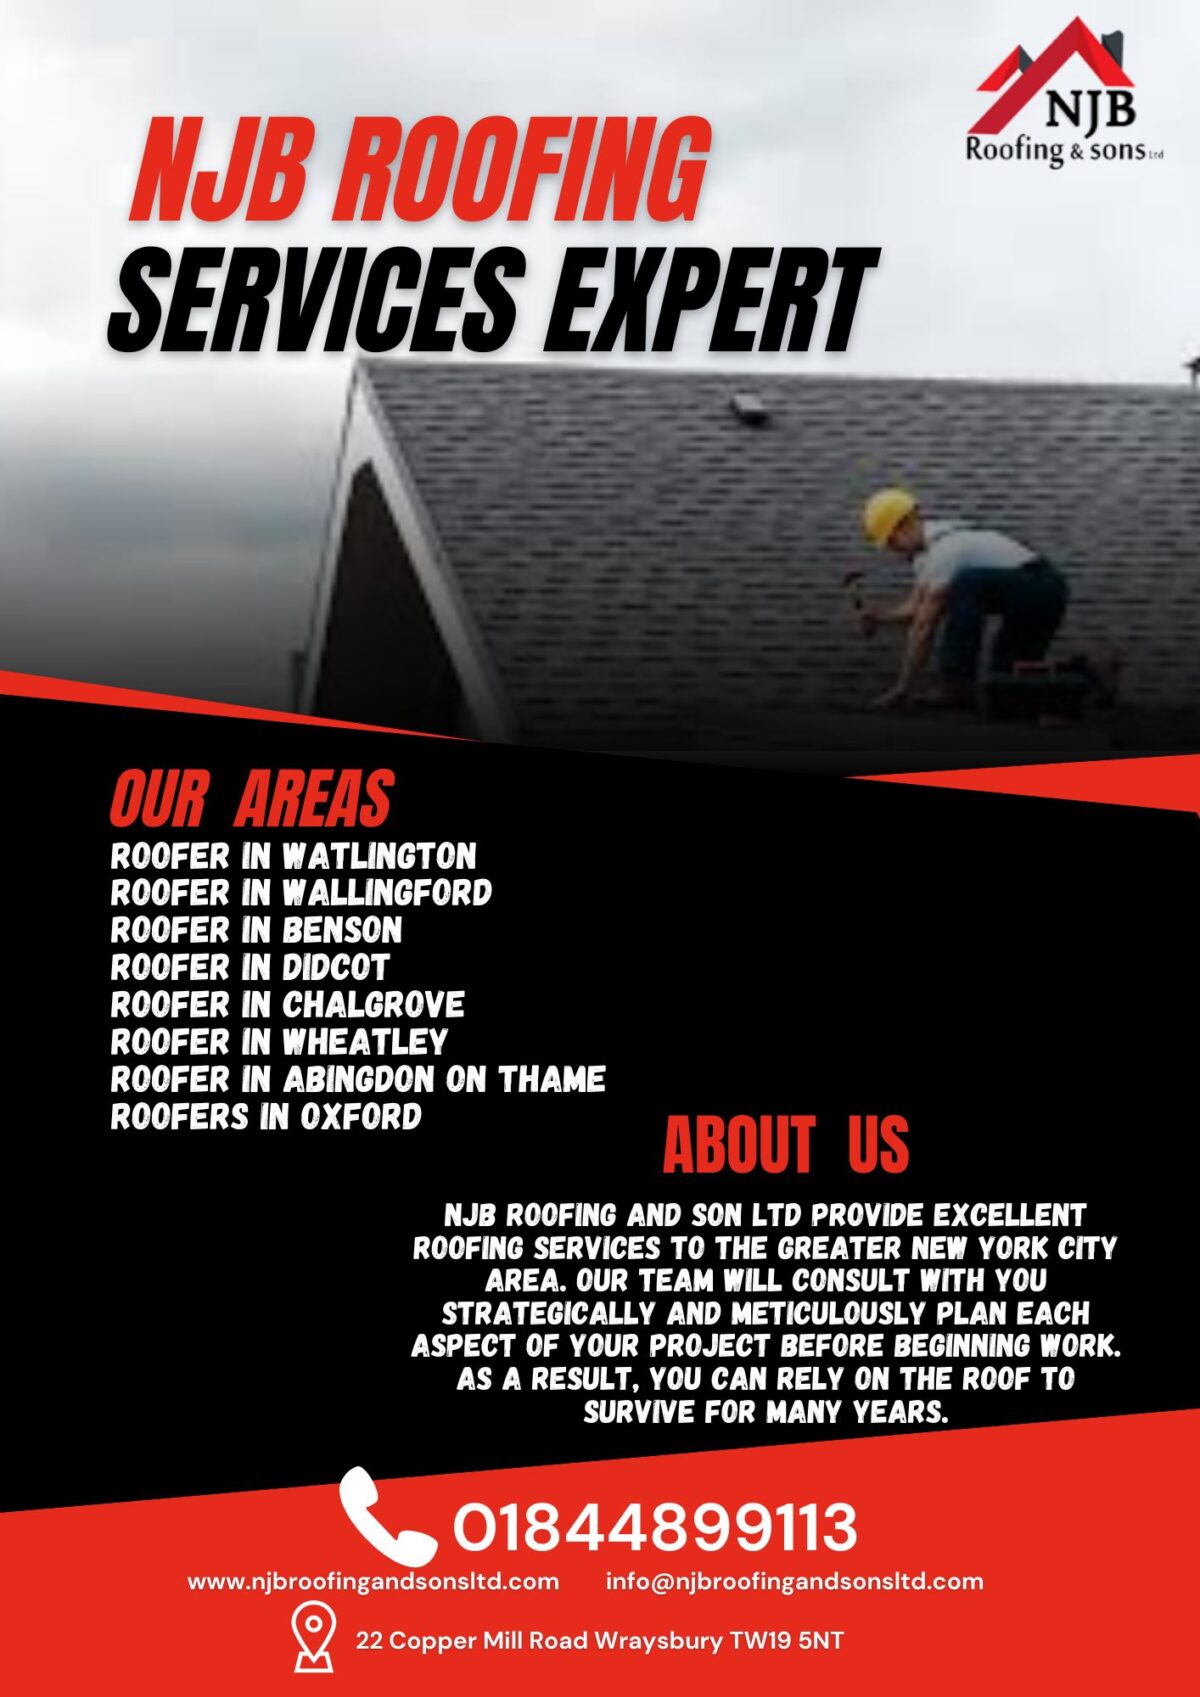 Reliable Roofing Services Across England